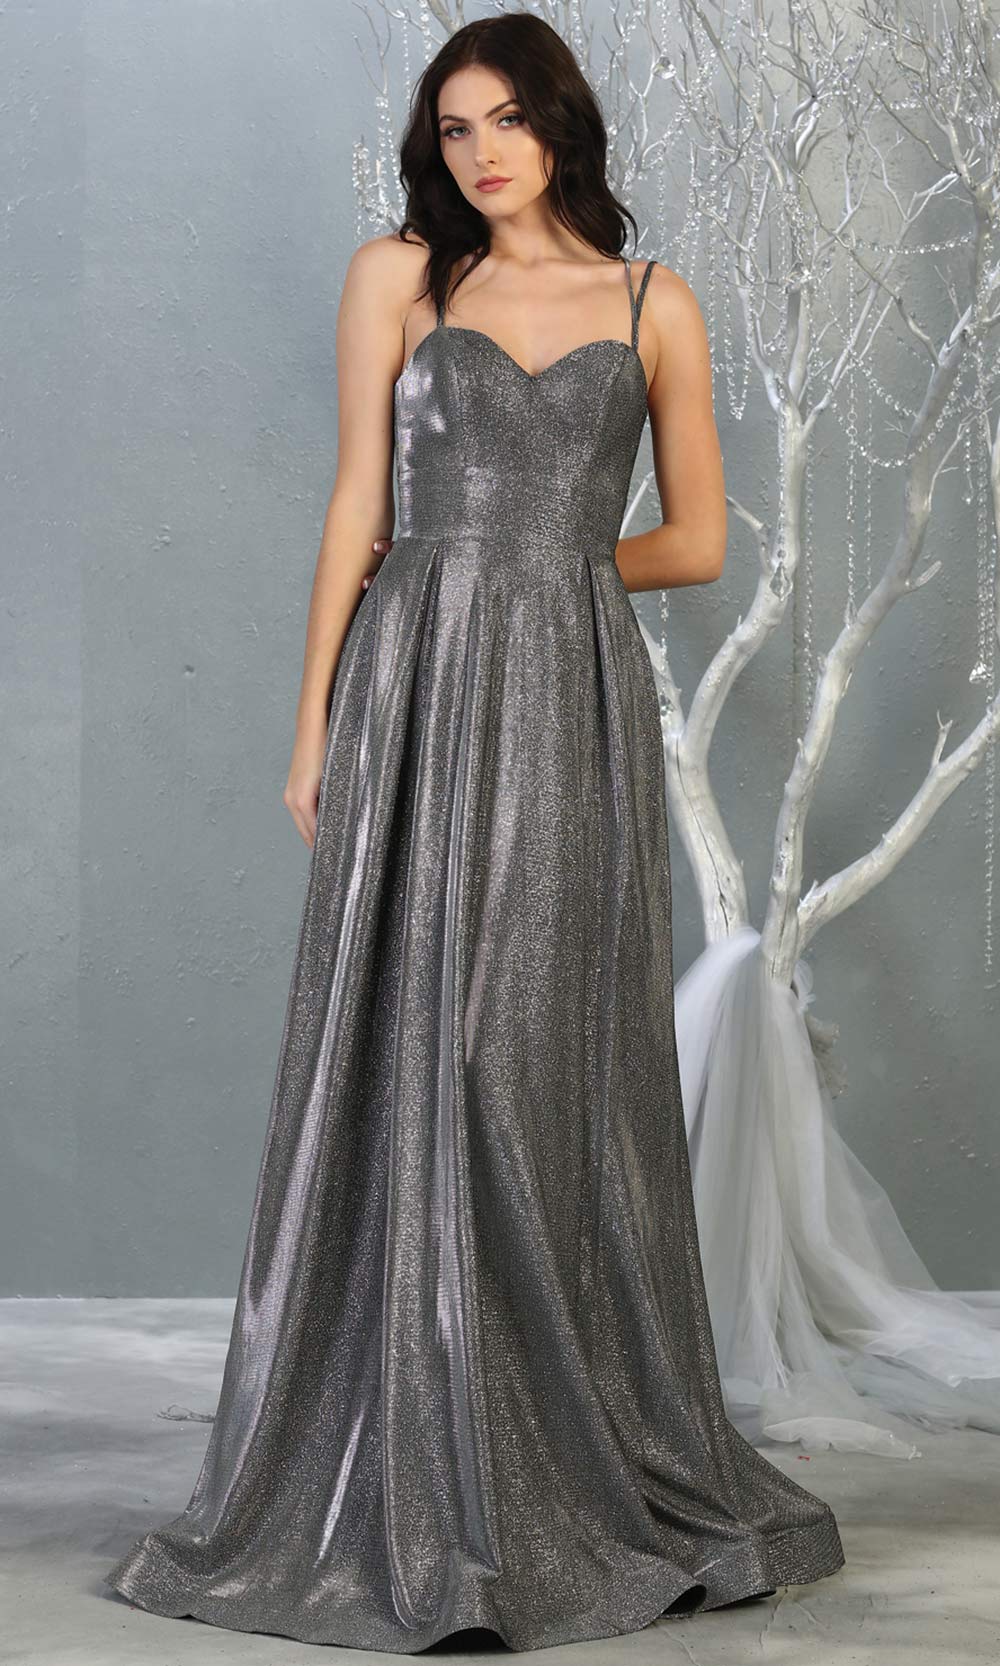 Mayqueen MQ1760 long charcoal gray metallic evening flowy dress w/straps. Full length dark grey gown is perfect for enagagement/e-shoot dress, wedding guest dress, indowestern gown, formal evening party dress, prom, wedding guest. Plus sizes avail.jpg